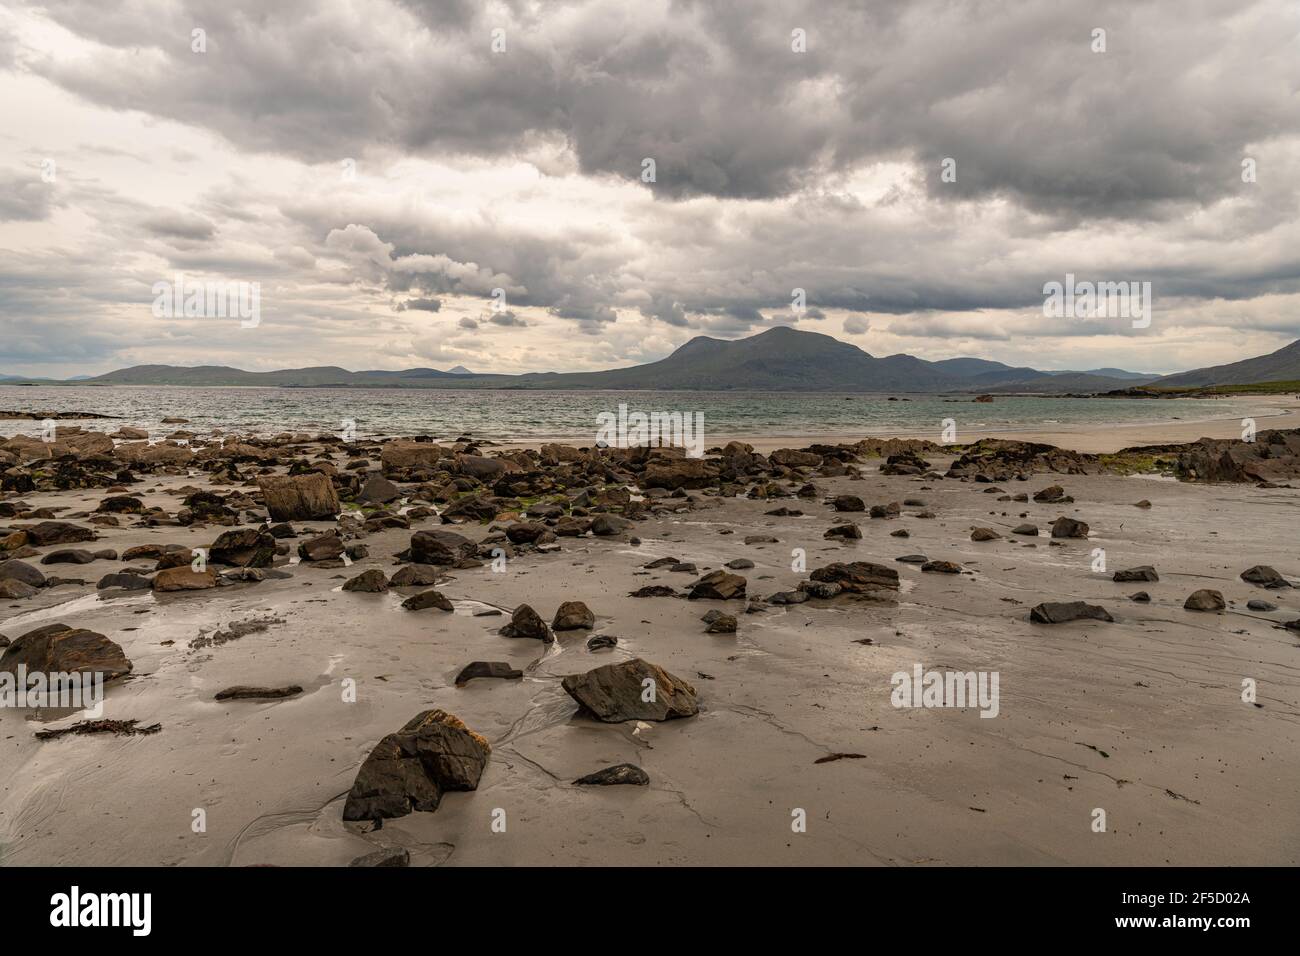 View from the beach on a cloudy day, Tully County Galway, Ireland Stock Photo